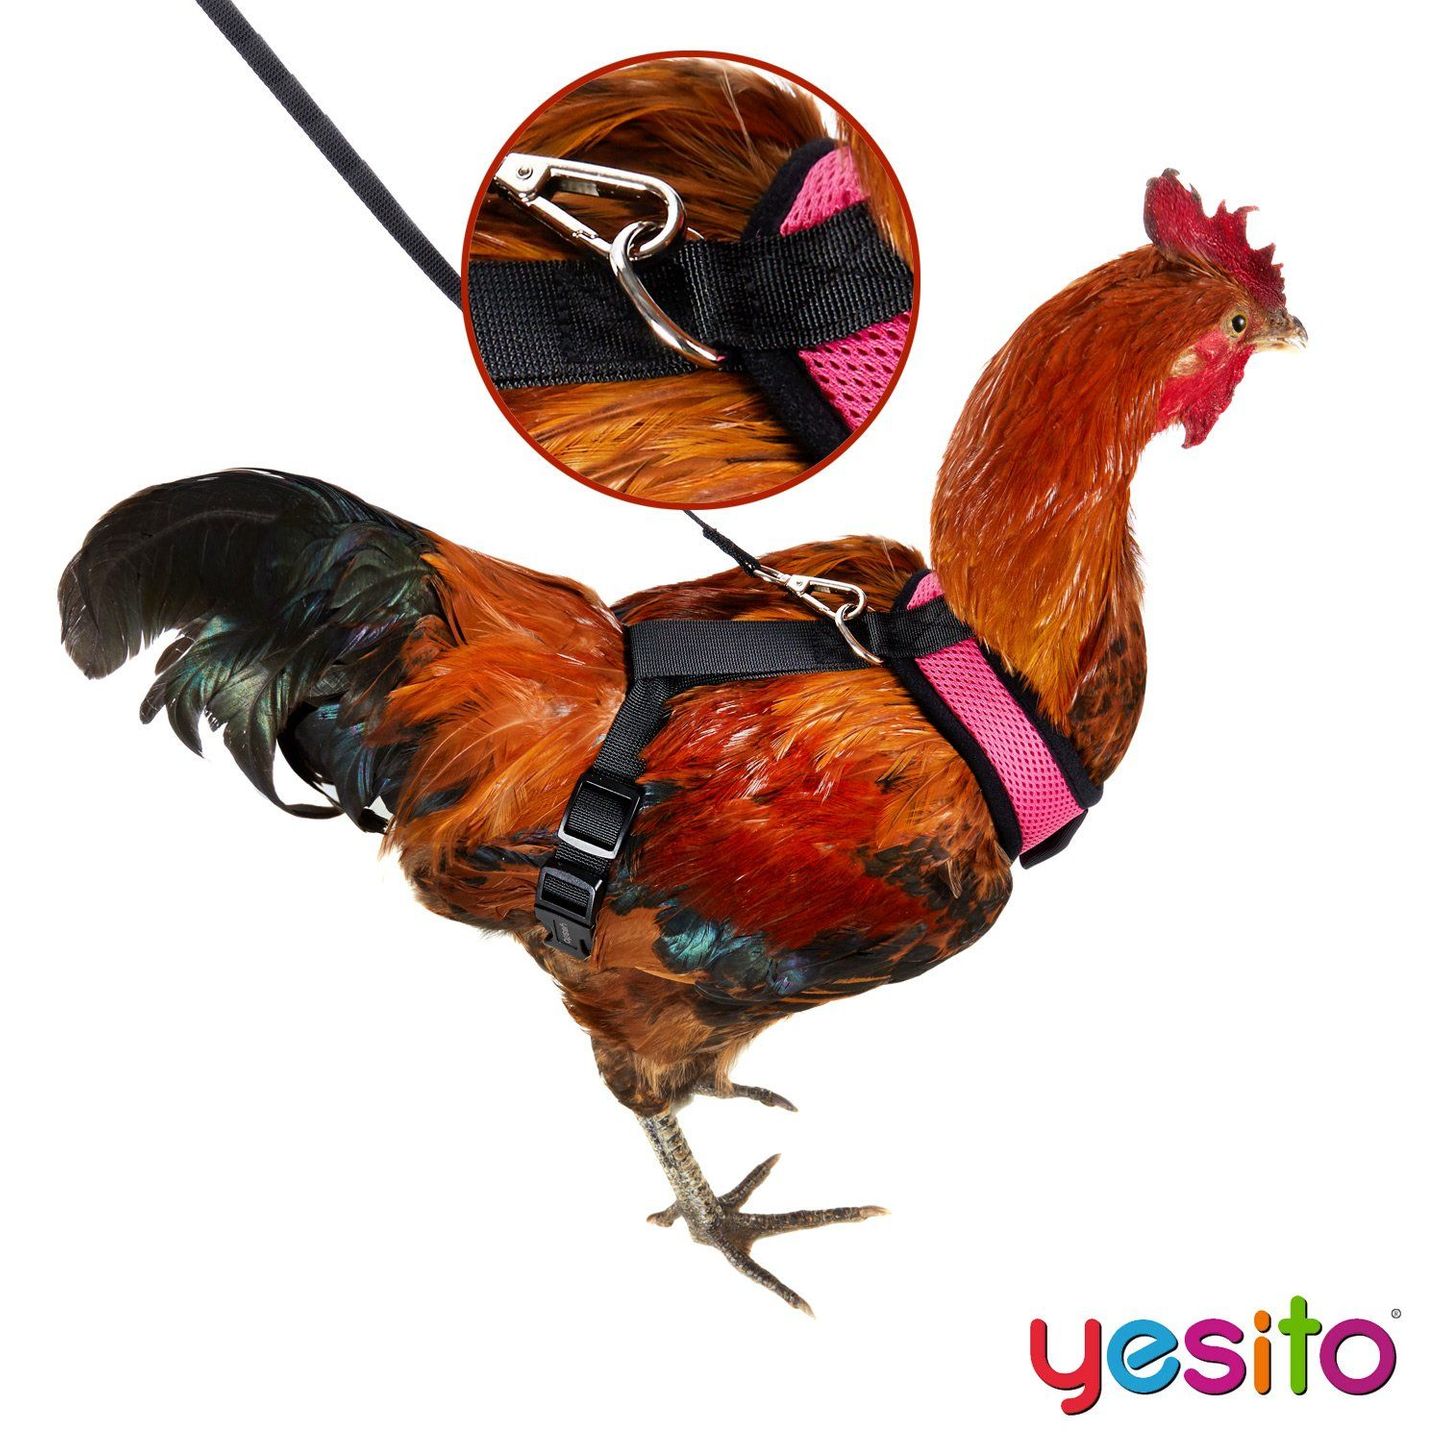 You Can Buy A Harness For Your Chicken To Safely And Stylishly Cross The Road